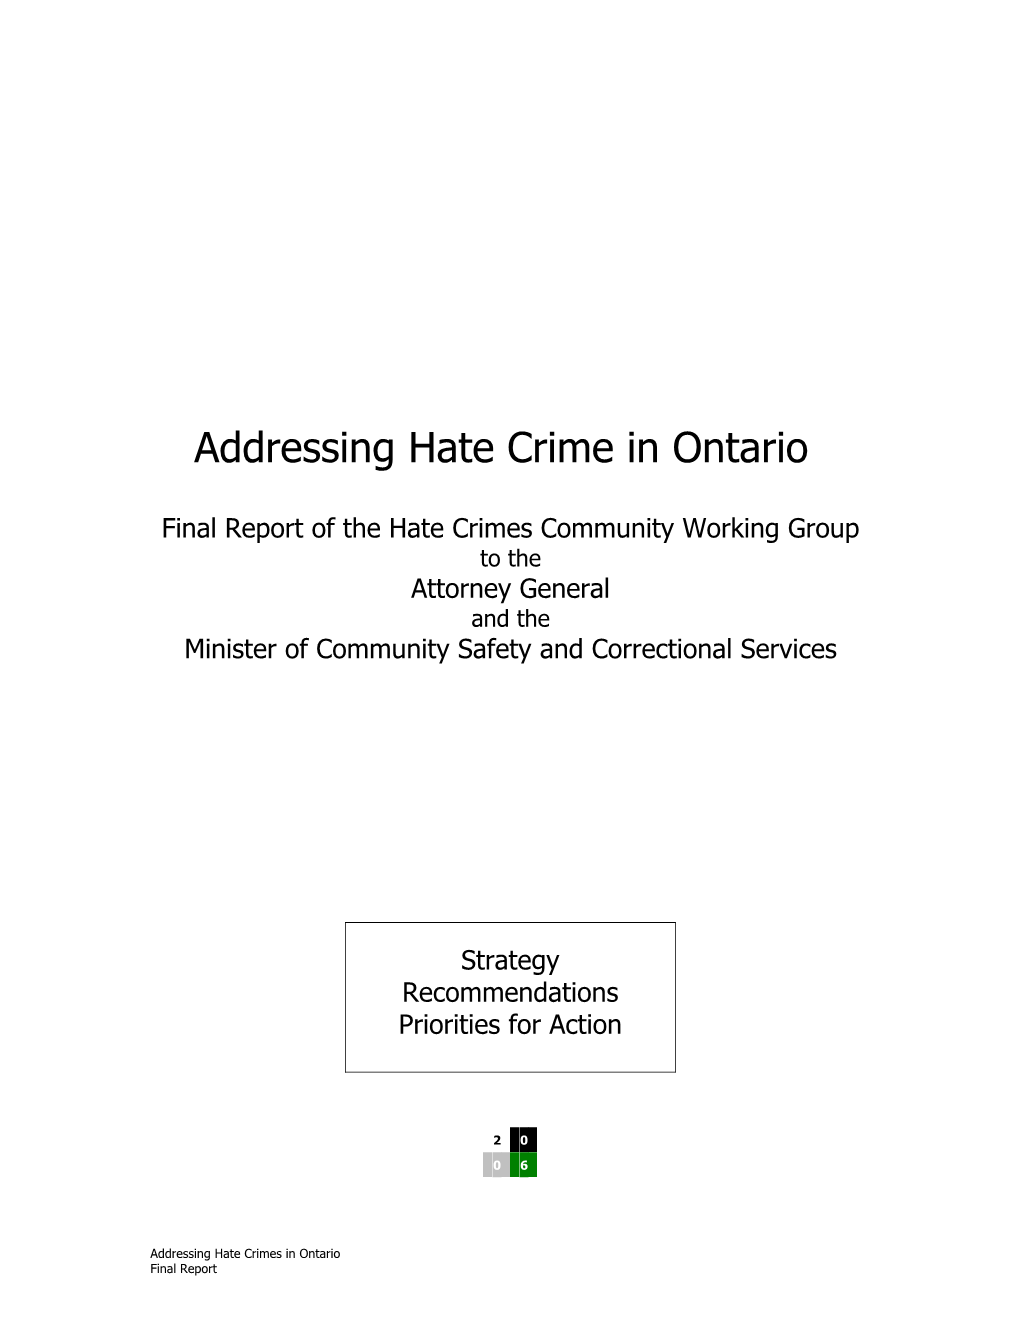 Final Report of the Hate Crimes Community Working Group to the Attorney General and the Minister of Community Safety and Correctional Services